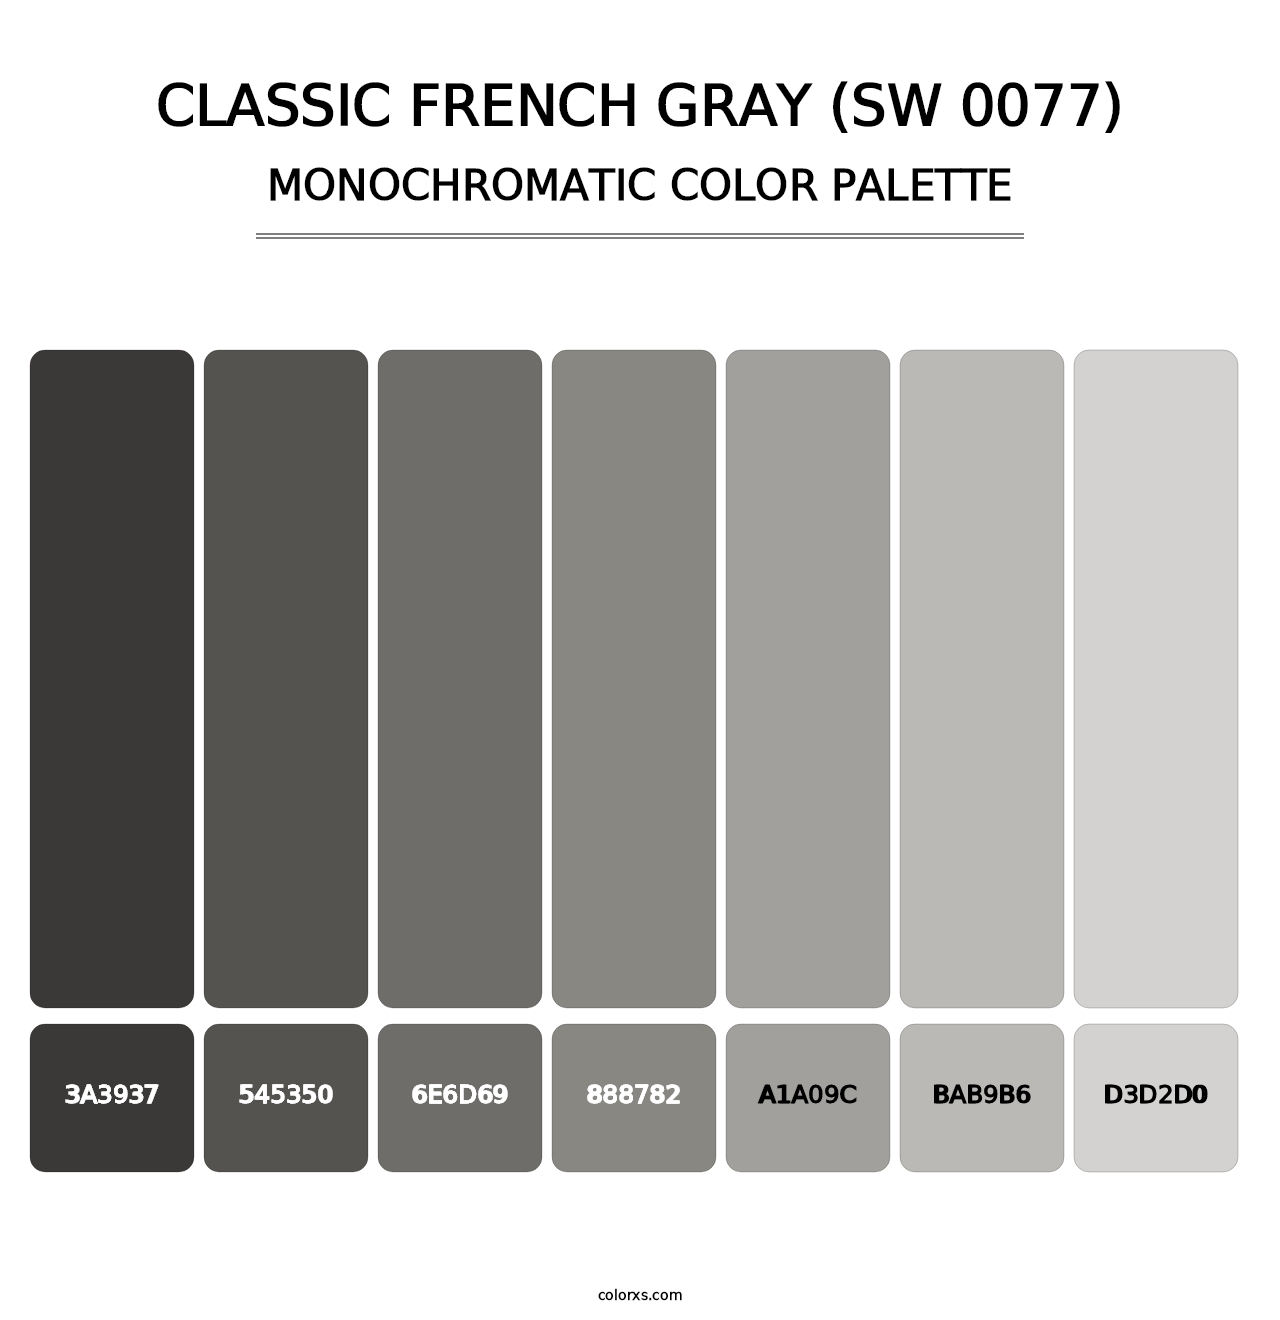 Classic French Gray (SW 0077) - Monochromatic Color Palette